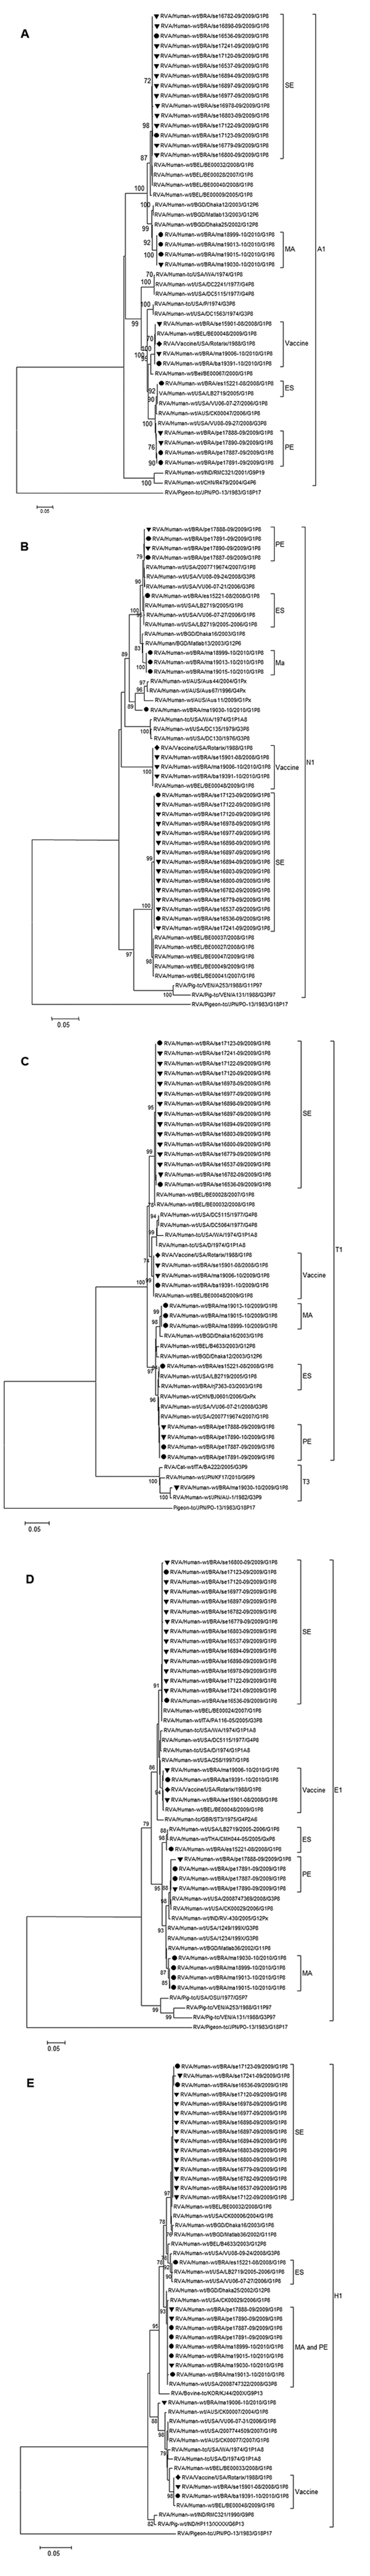 Phylogenetic analysis of nucleotide sequence of A) nonstructural protein 1 [NSP1], B) NSP2, C), NSP3, D) NSP4, and E) NSP5 encoding genes of G1P[8] RVA samples collected in Brazil and described in this study. Filled circles indicate samples from non-vaccinated children and filled triangles vaccinated children. The Rotarix strain is indicated by a filled diamond. Bootstrap values &gt;70%, estimated with 2,000 pseudoreplicate datasets, are indicated at each node. Only the genotype in which the str